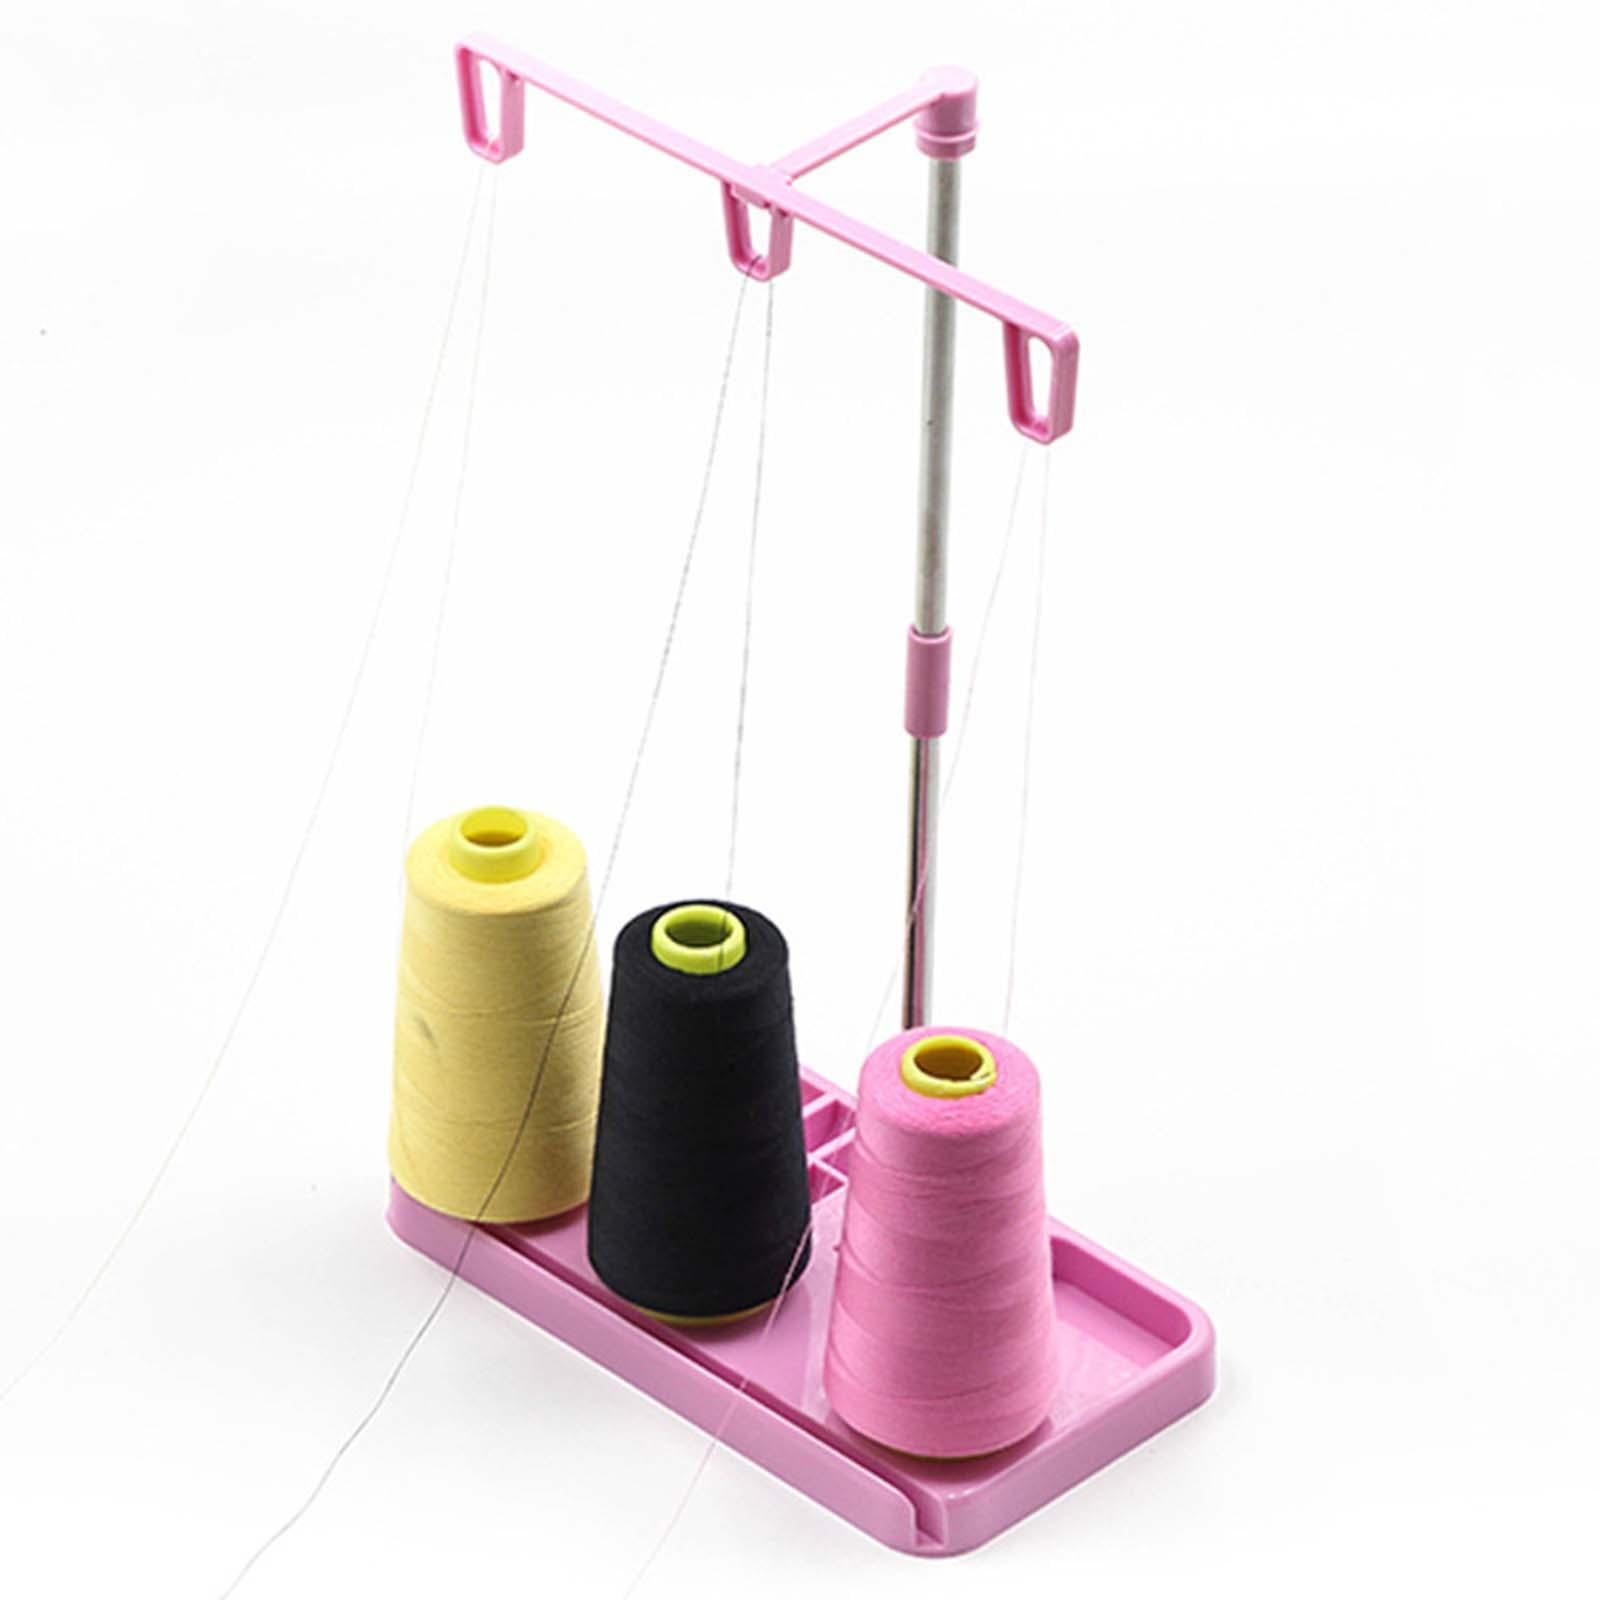 10 Spool Thread Stand - The Wiener Dog Ranch